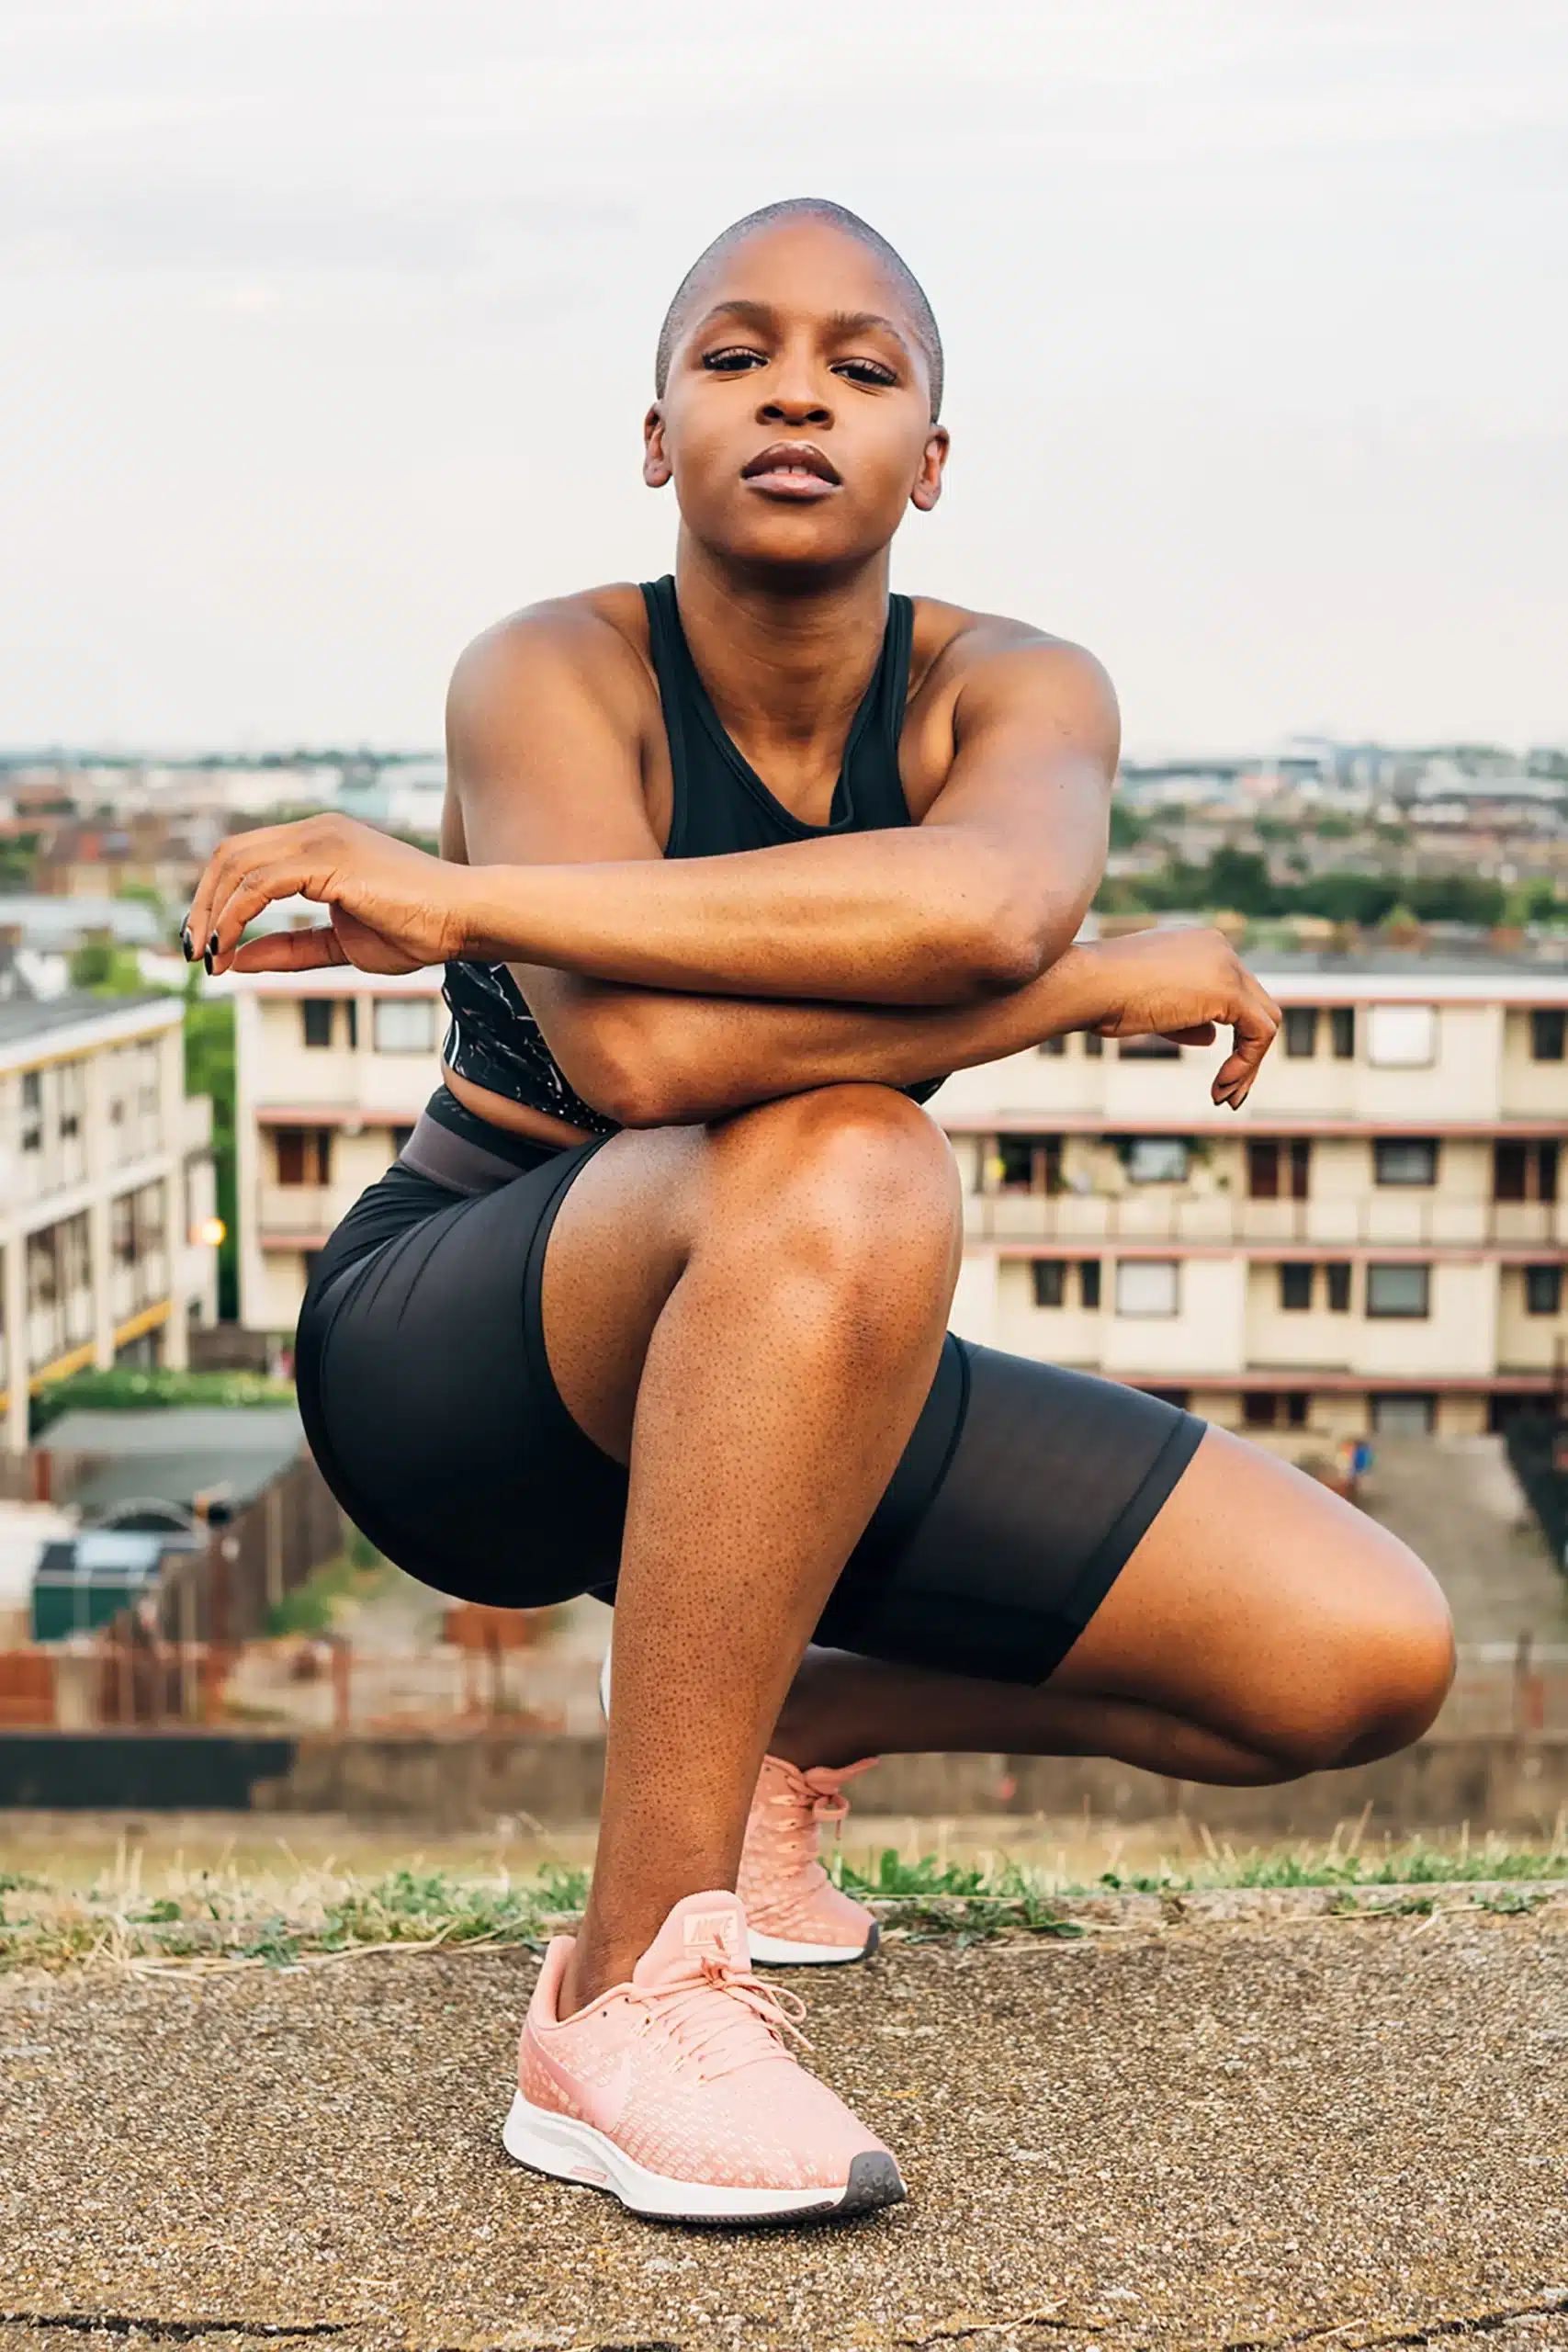 "My boyfriend broke up with me after I contracted COVID-19" – Julie Adenuga